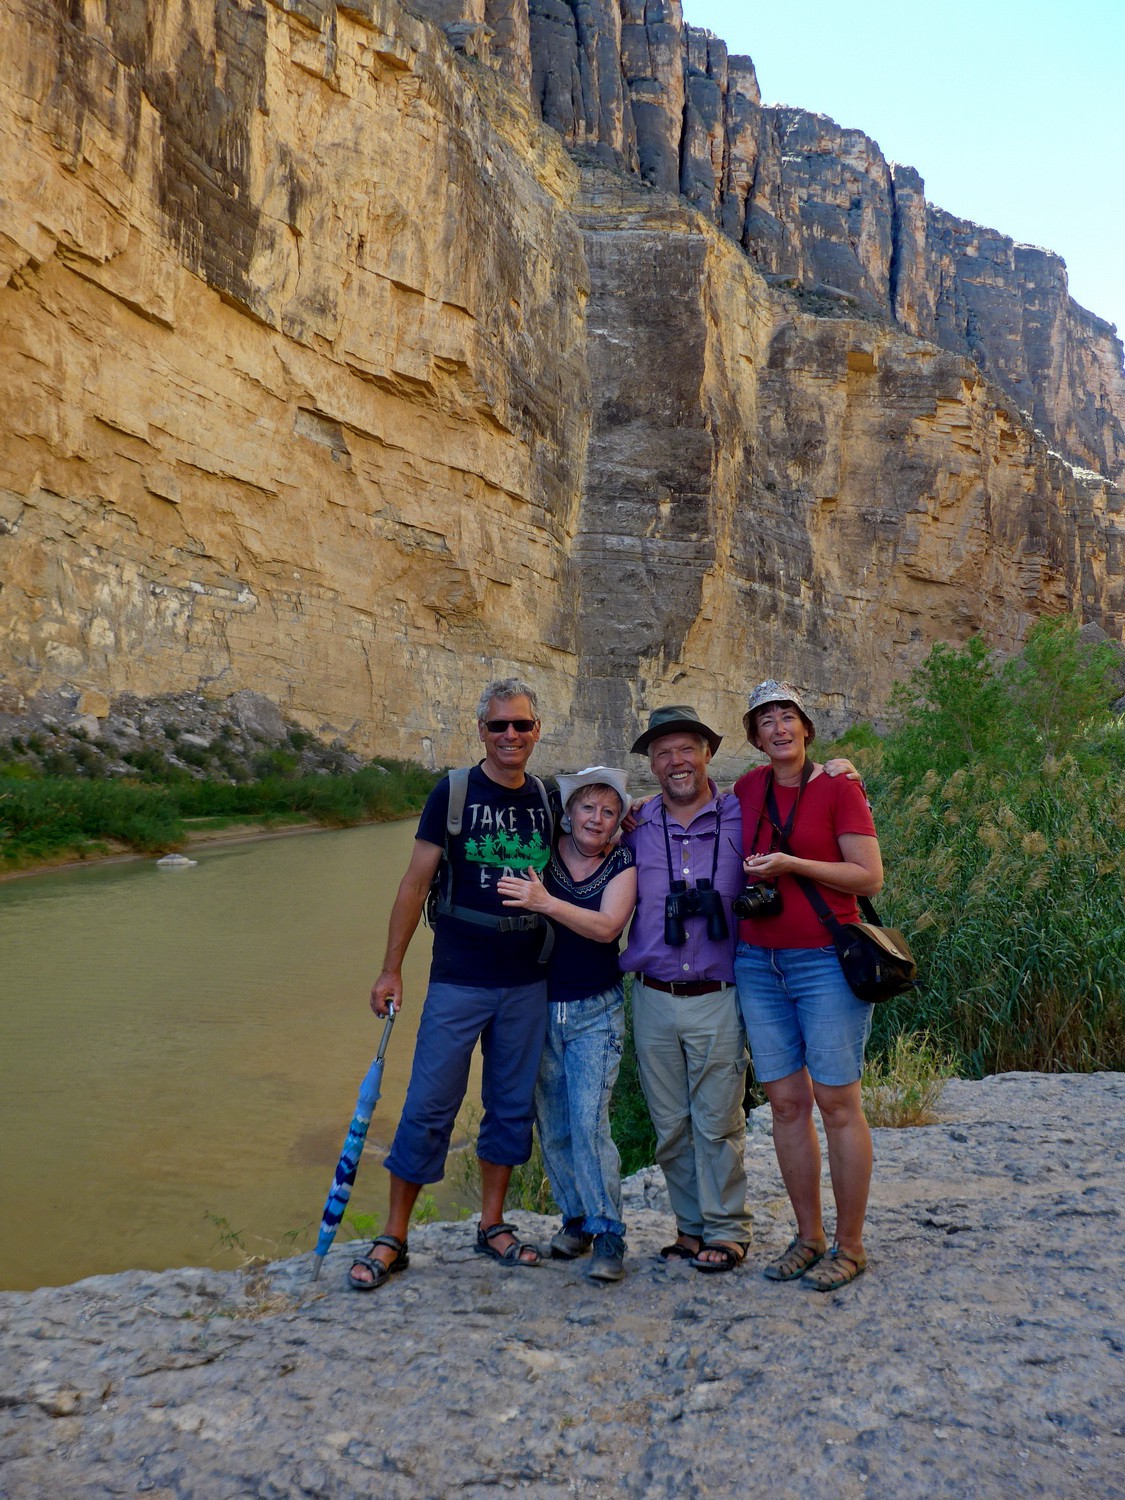 Alfred, Marion, Elmar and Ilse in the canyon